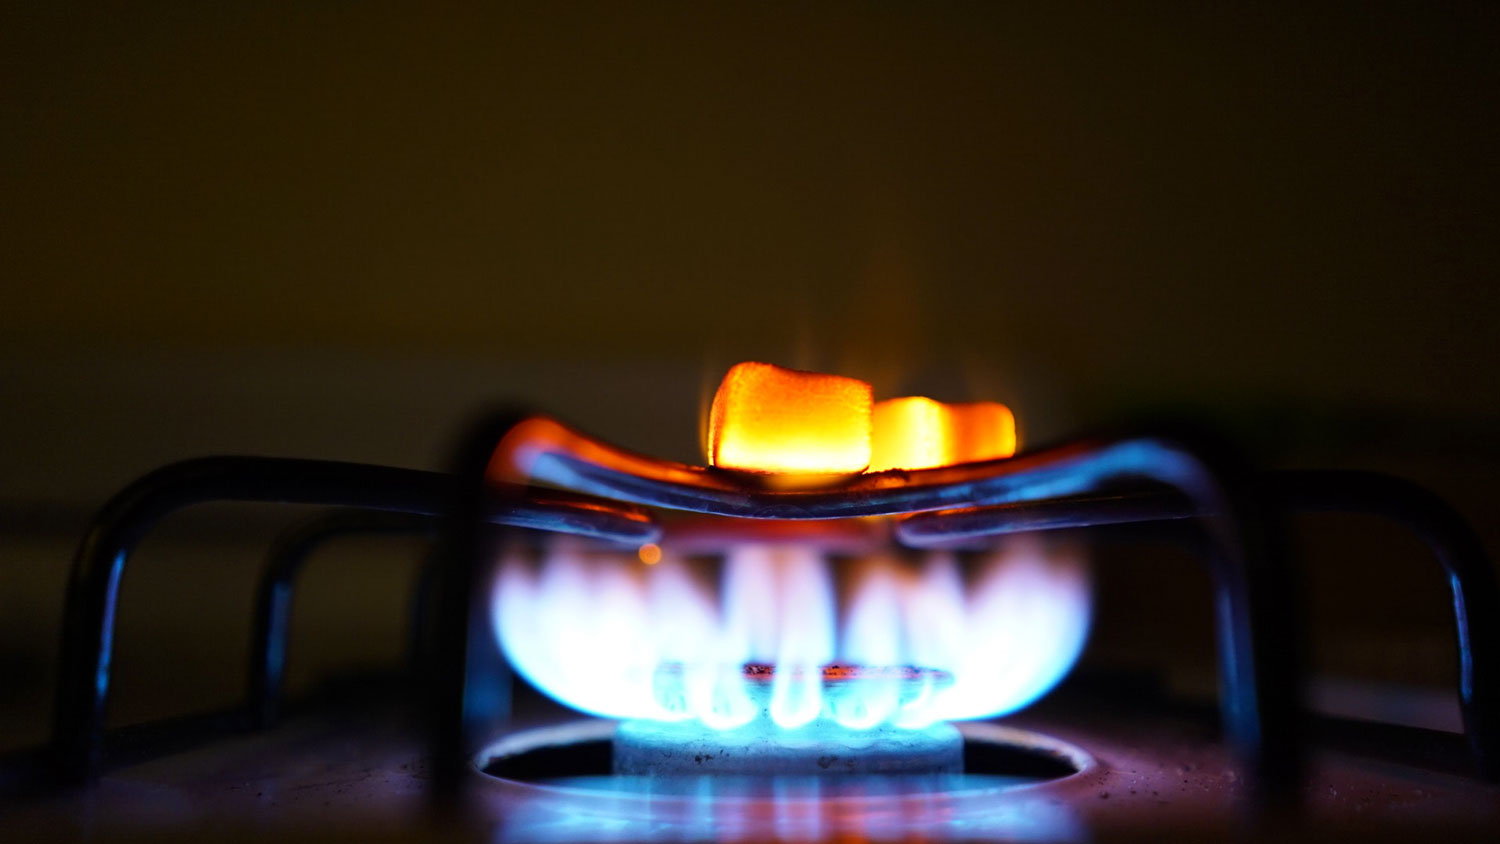 Gas stove burner with blue and yellow flame